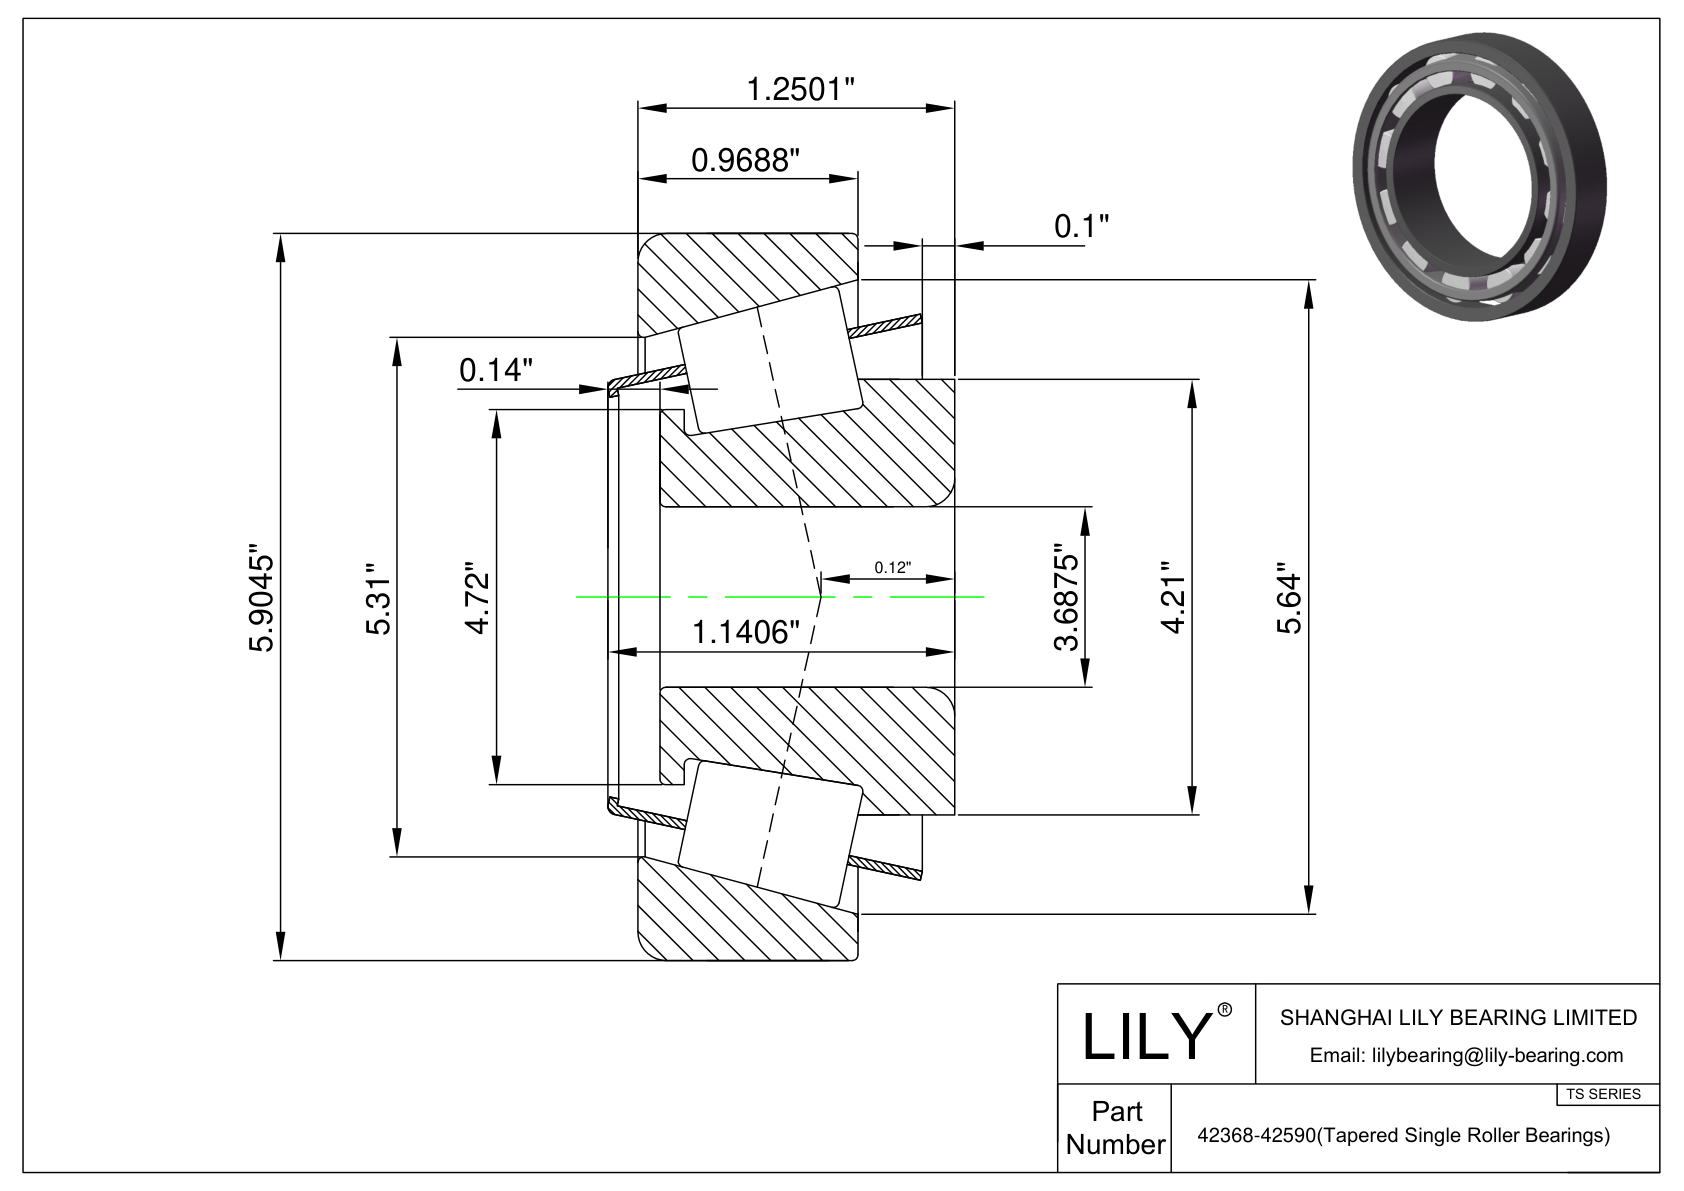 42368-42590 TS (Tapered Single Roller Bearings) (Imperial) cad drawing